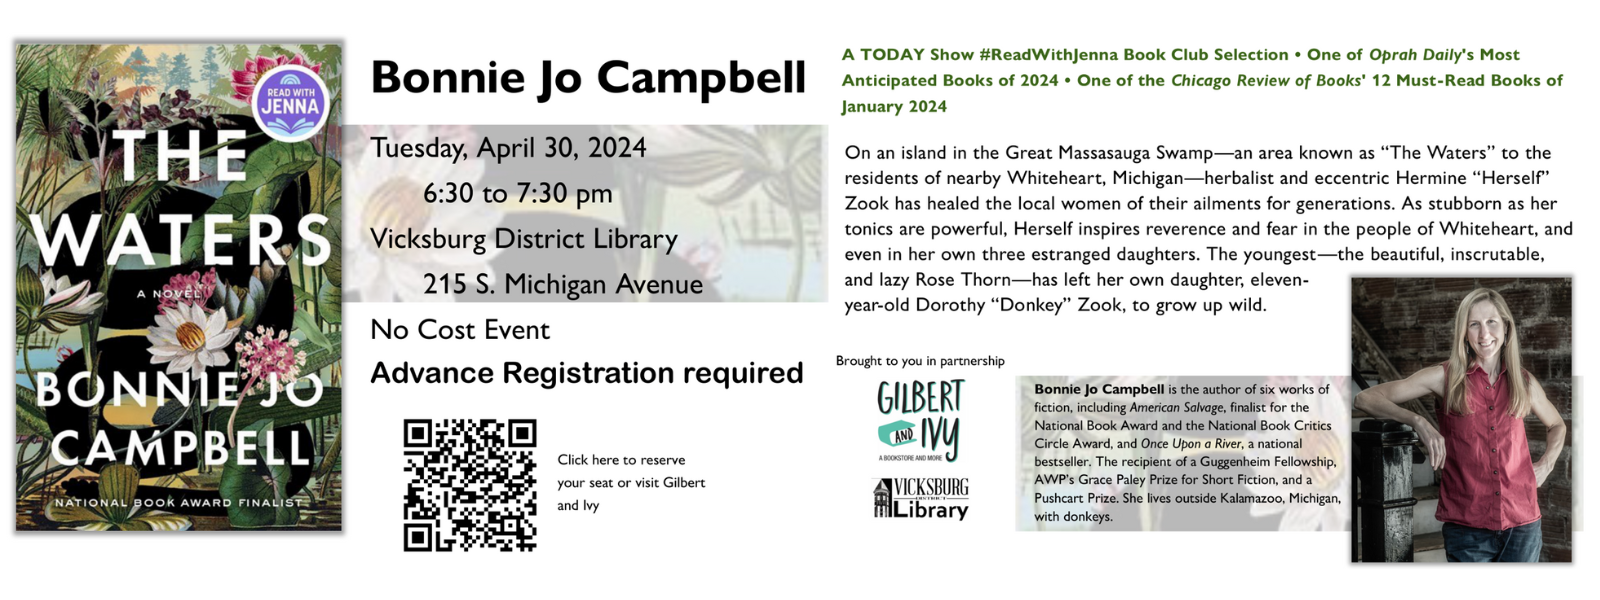 Local author Bonnie Jo Campbell will visit the VDL on April 30